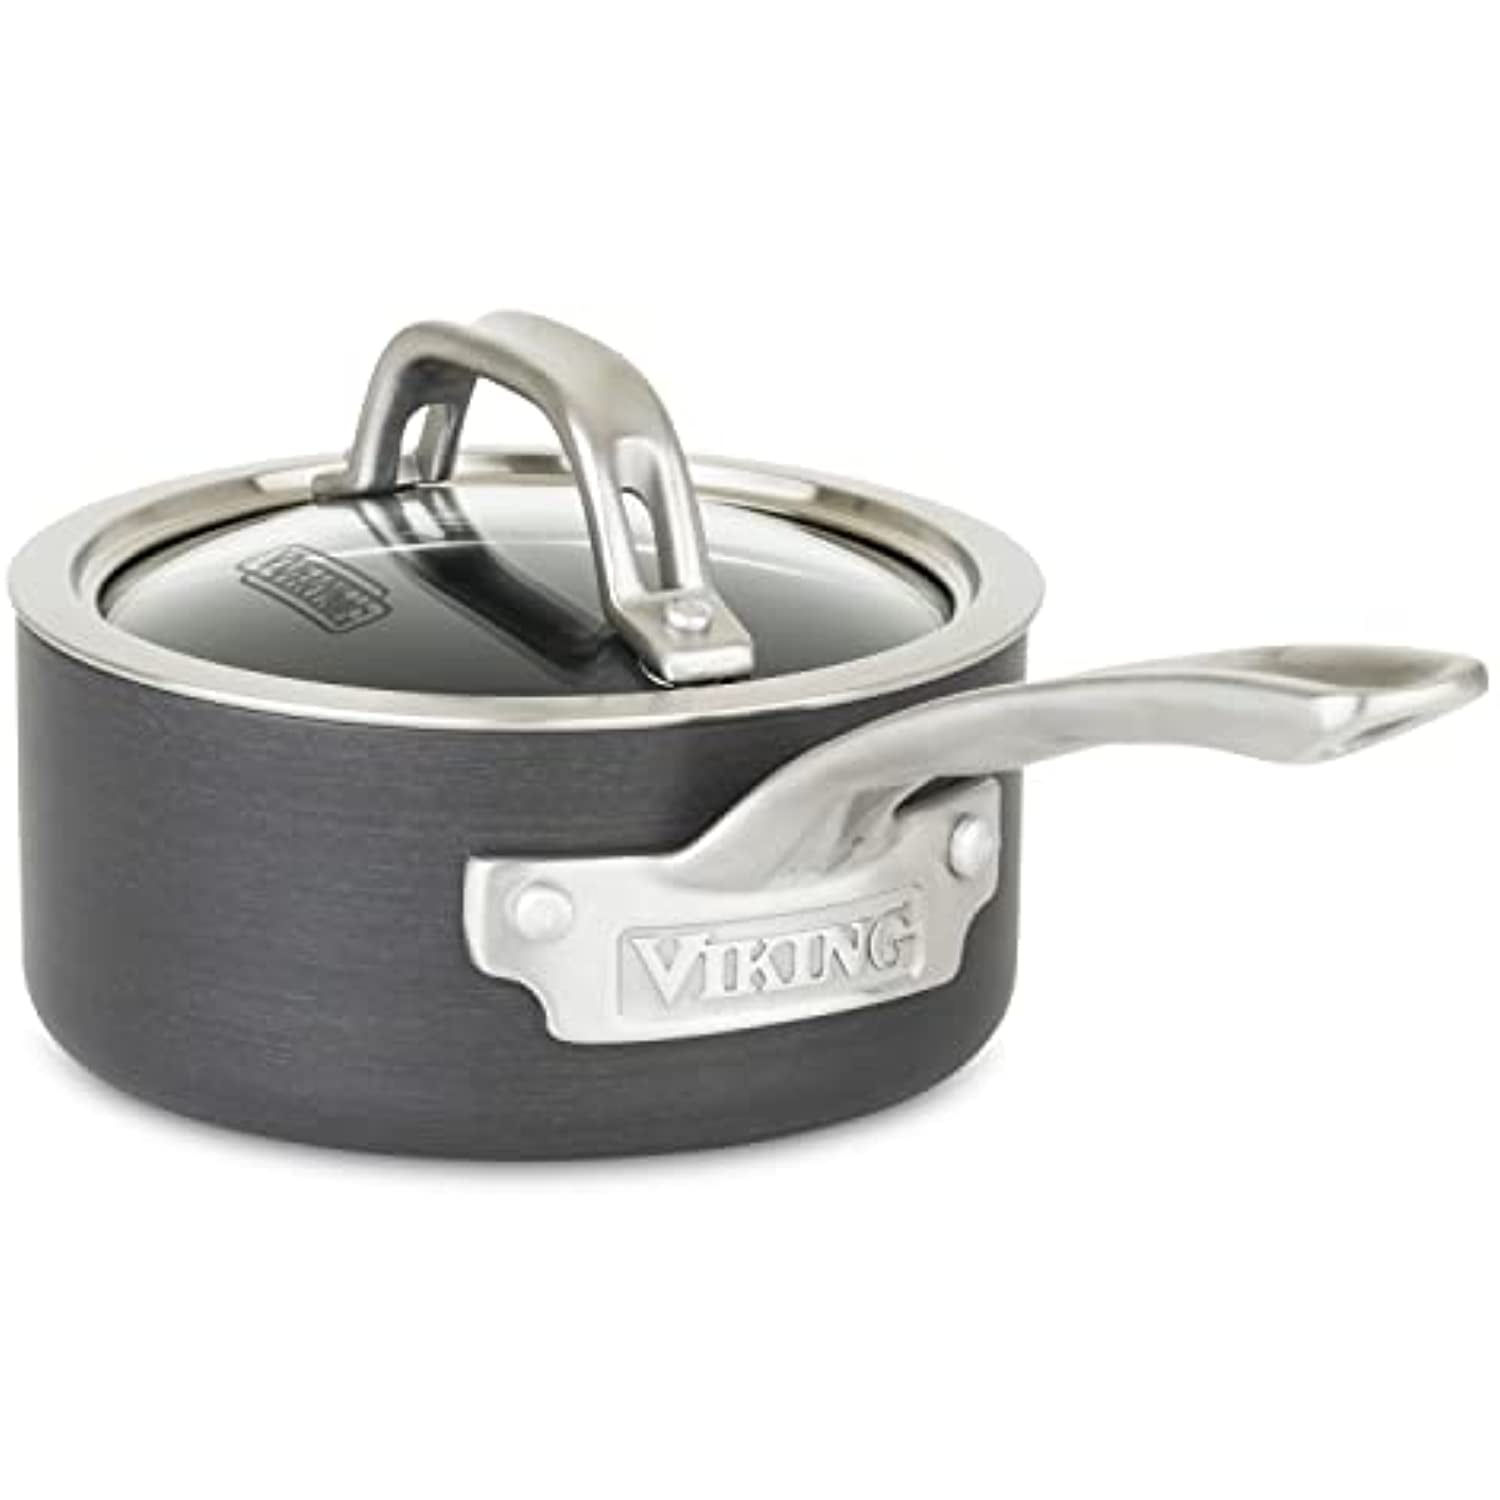 Sauce Pan Stainless Steel 1 1/2 Quart with Cover — Libertyware